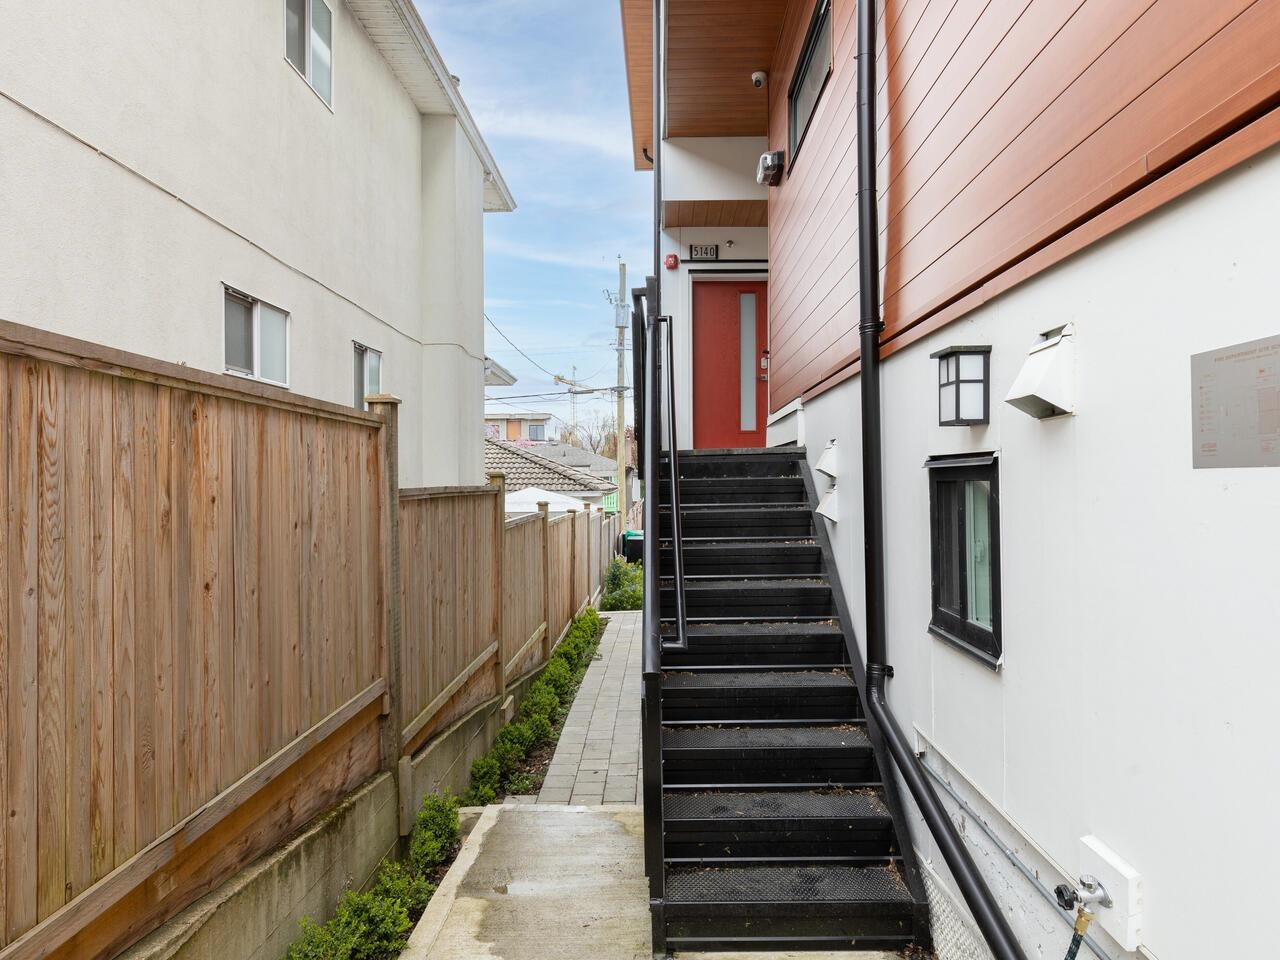 Listing image of 5140 SLOCAN STREET